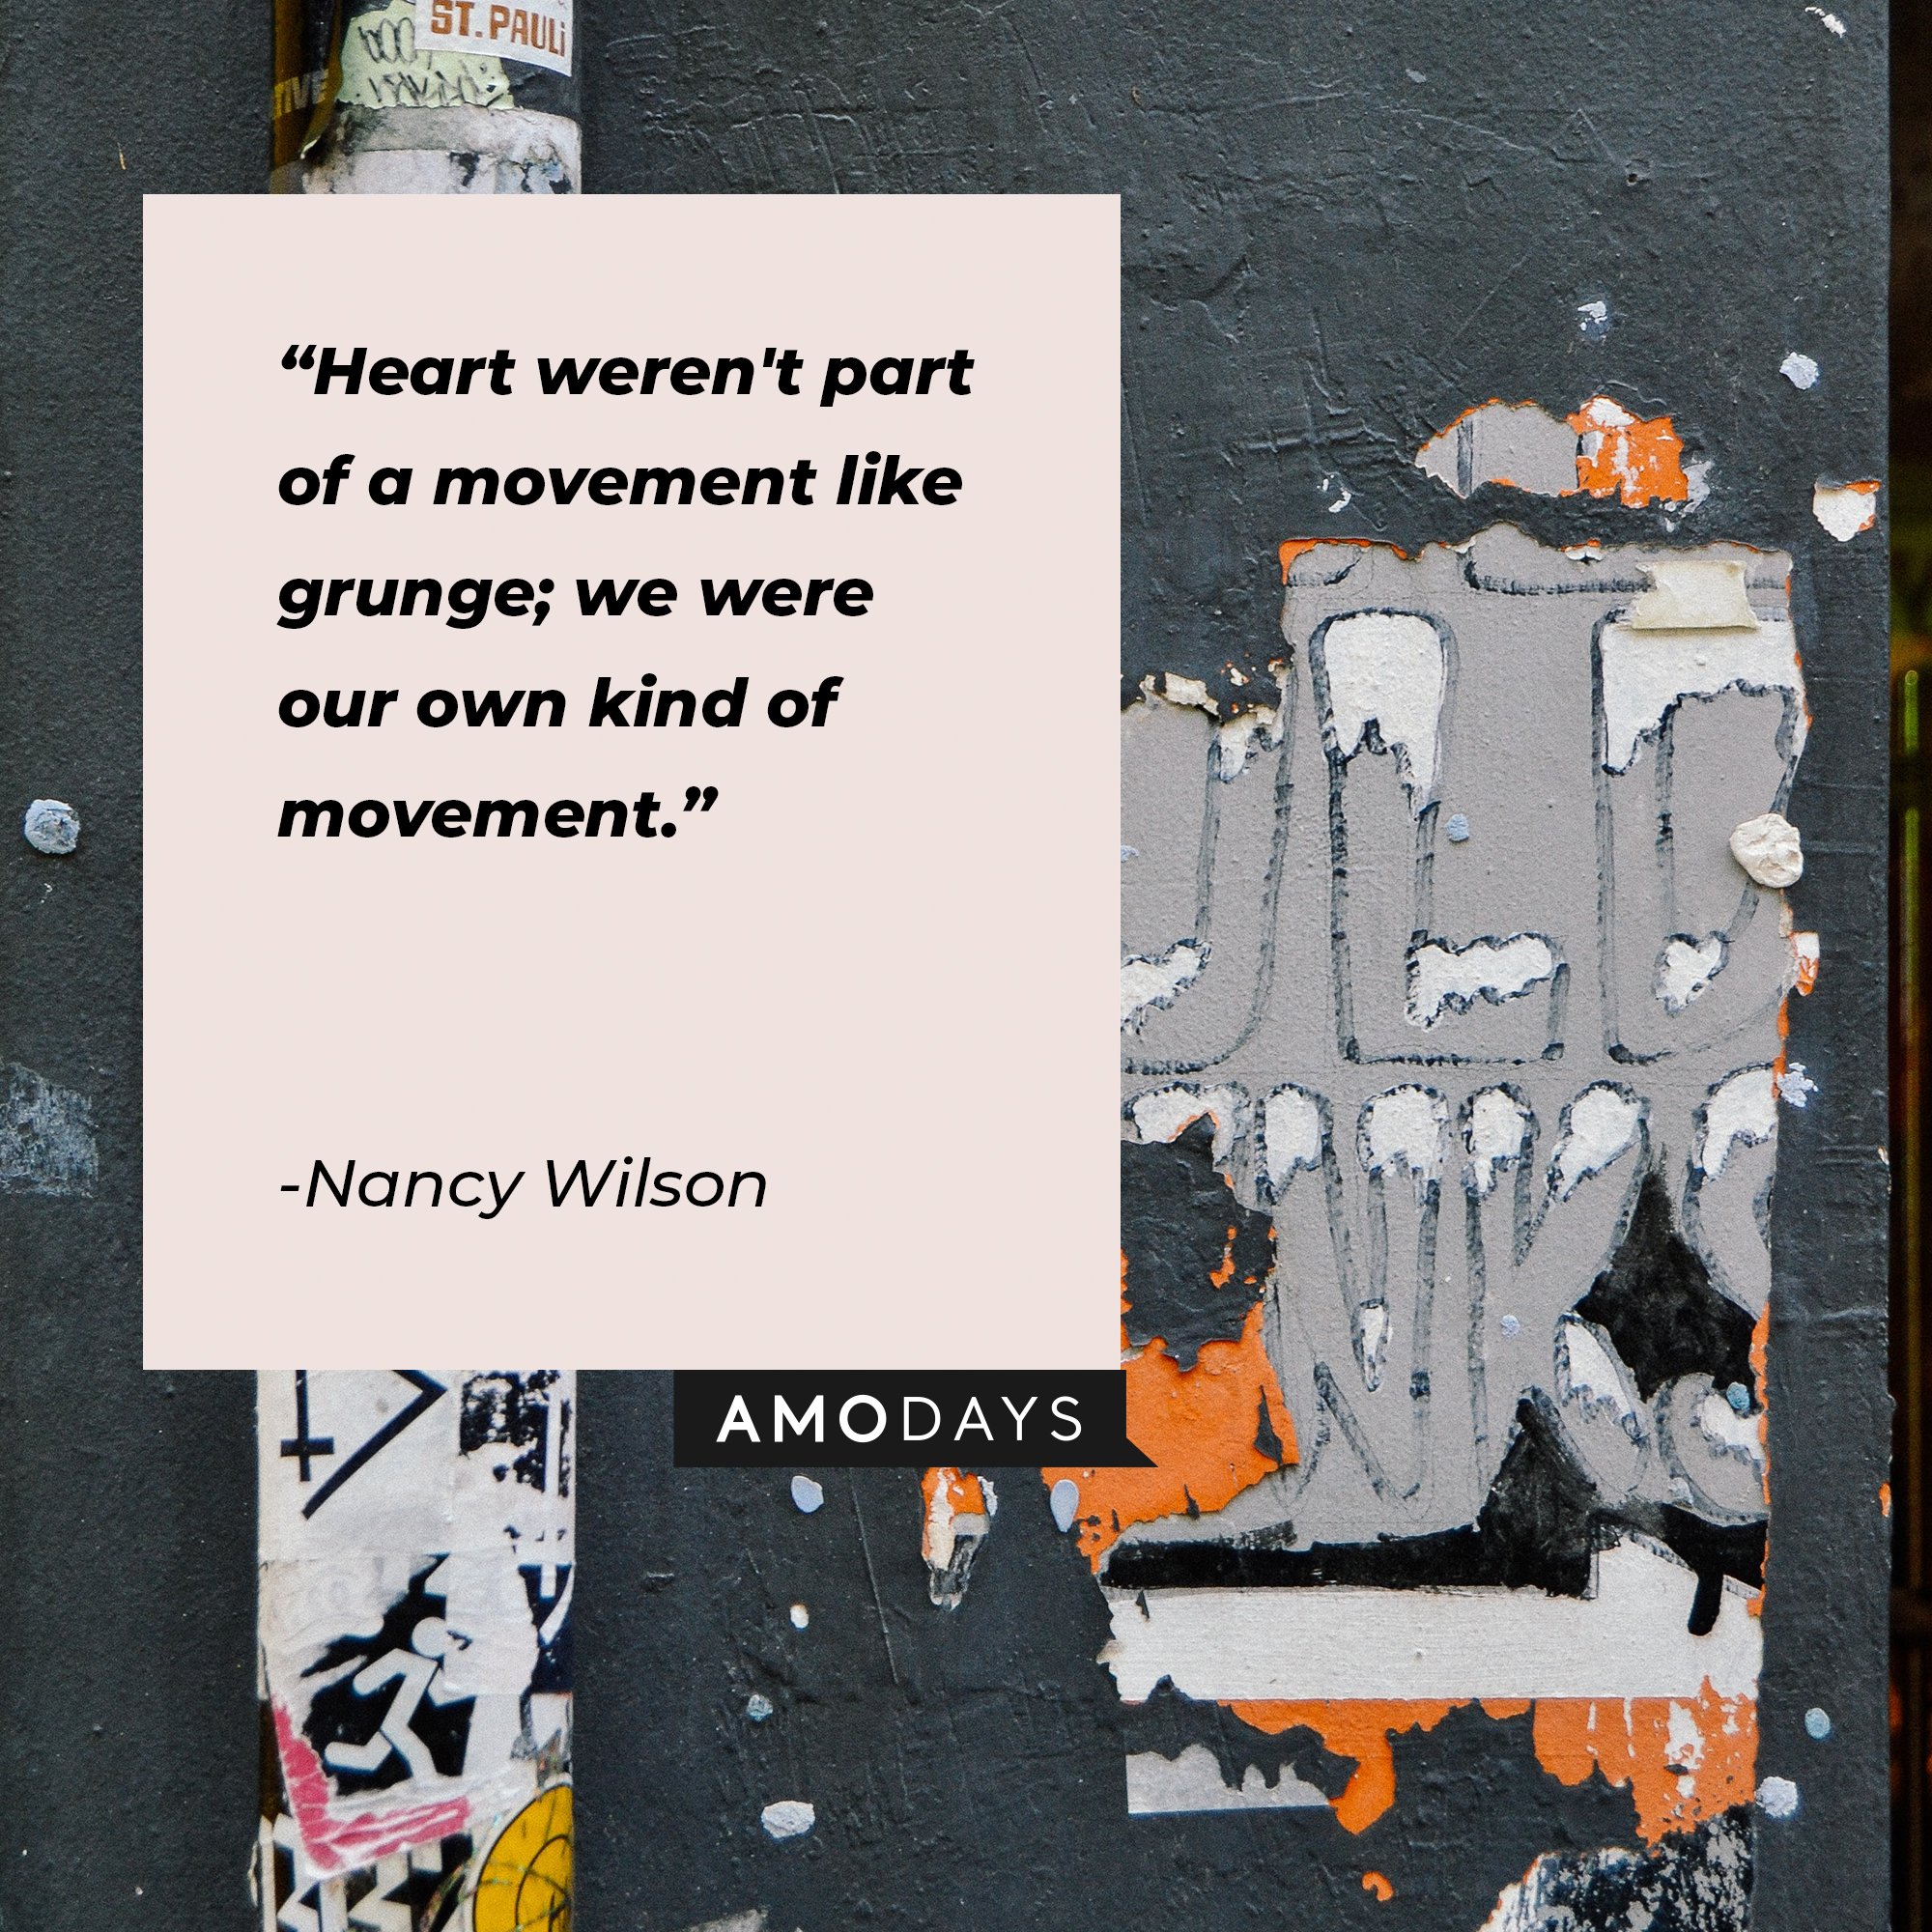 Nancy Wilson’s quote: "Heart weren't part of a movement like grunge; we were our own kind of movement." | Image: AmoDays